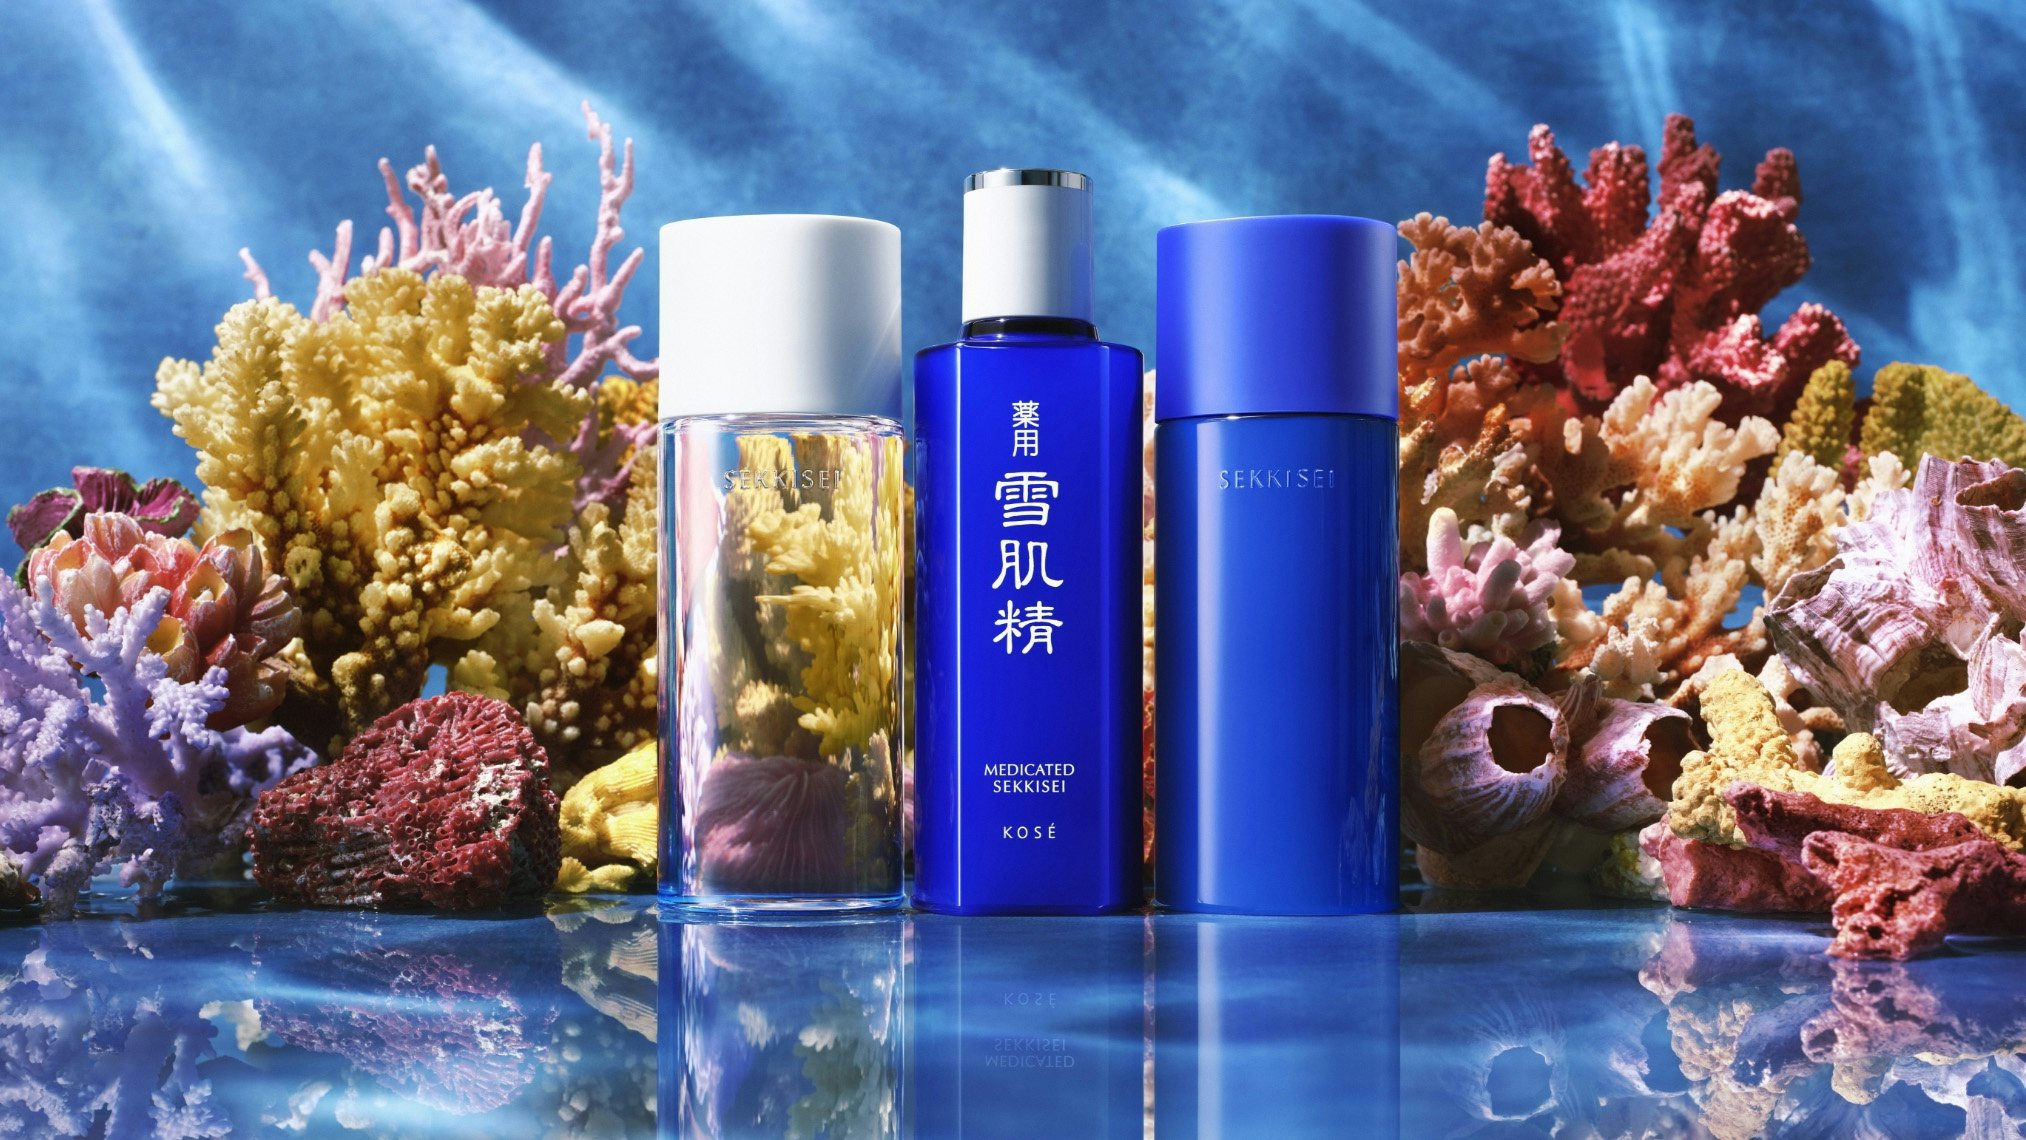 Chinese consumers are boycotting Japanese products after Japan started releasing treated radioactive water into the Pacific Ocean. How will this impact brands' bottom line? Photo: Kosé Corporation